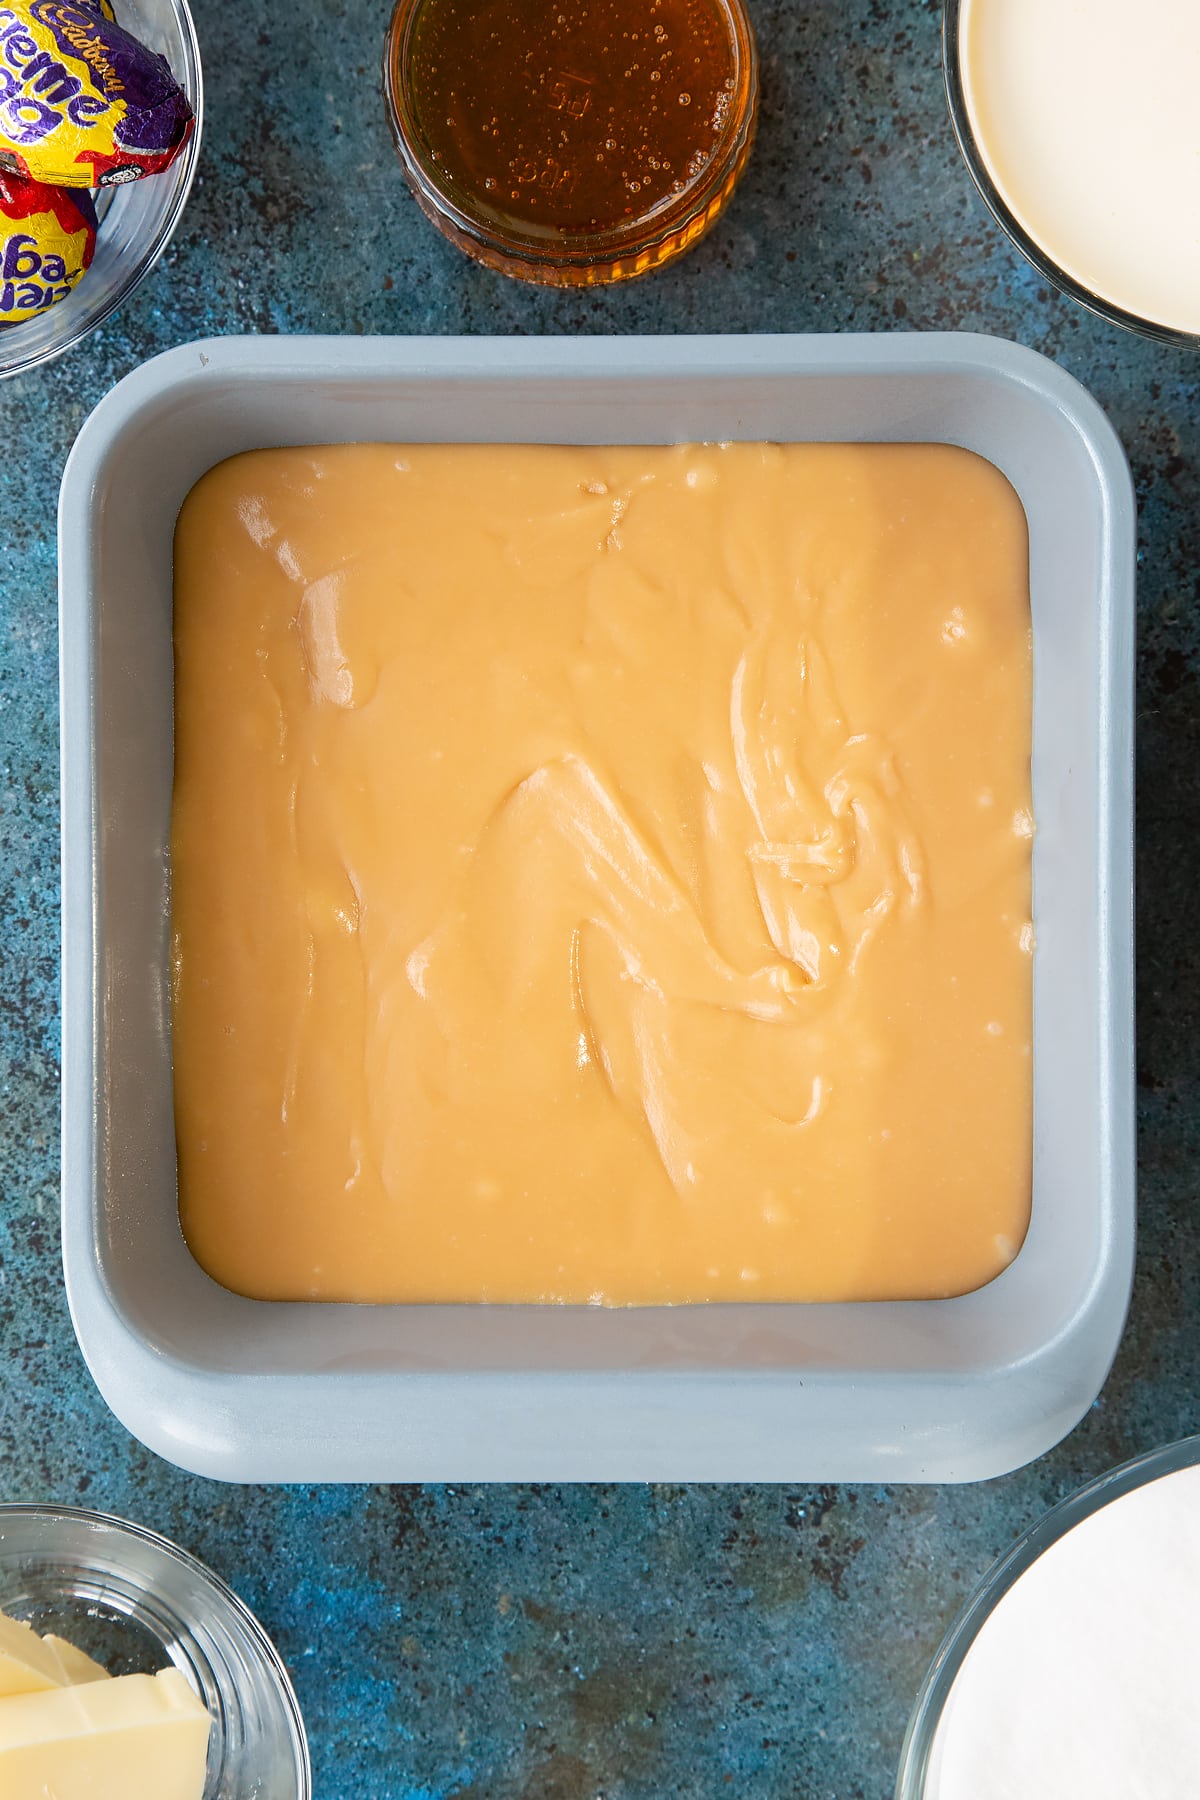 Pouring the fudge into the bottom of a baking tin. 